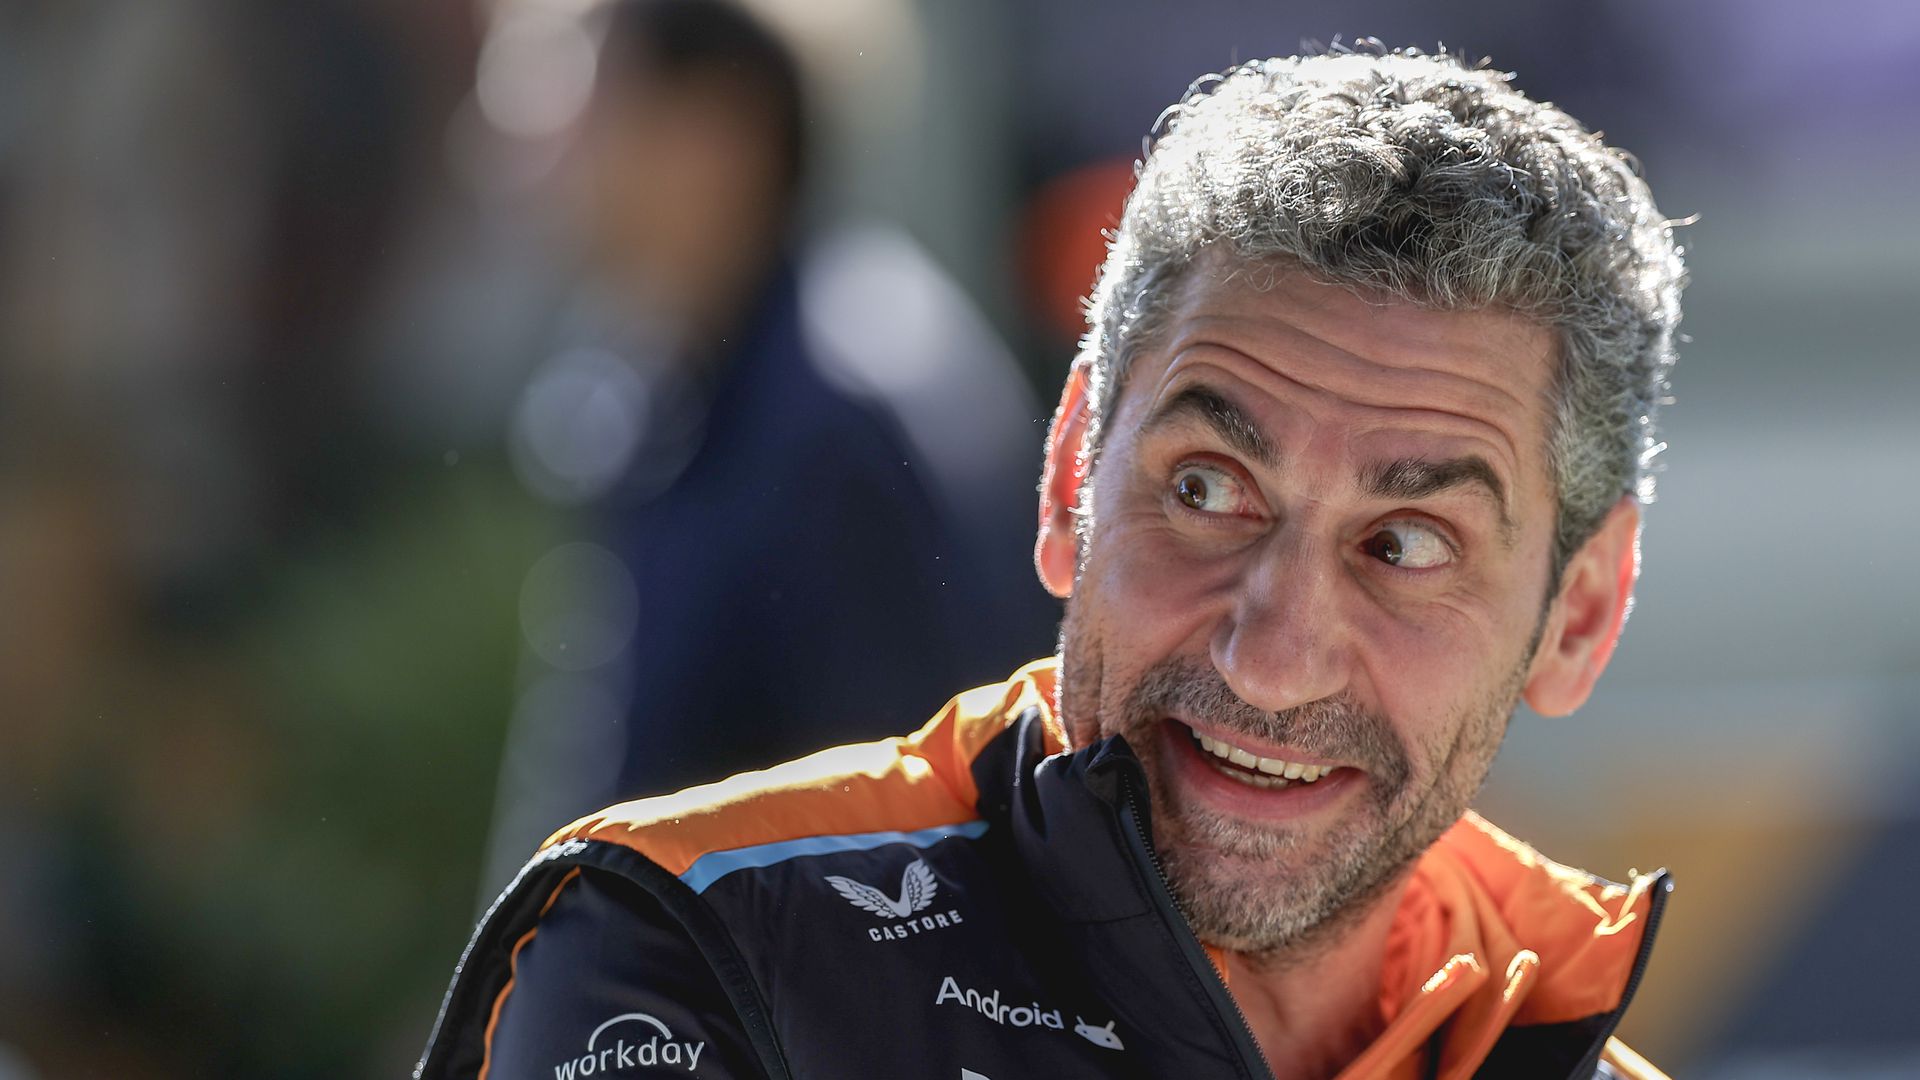 mclaren managing expectations ahead of f1 chinese grand prix